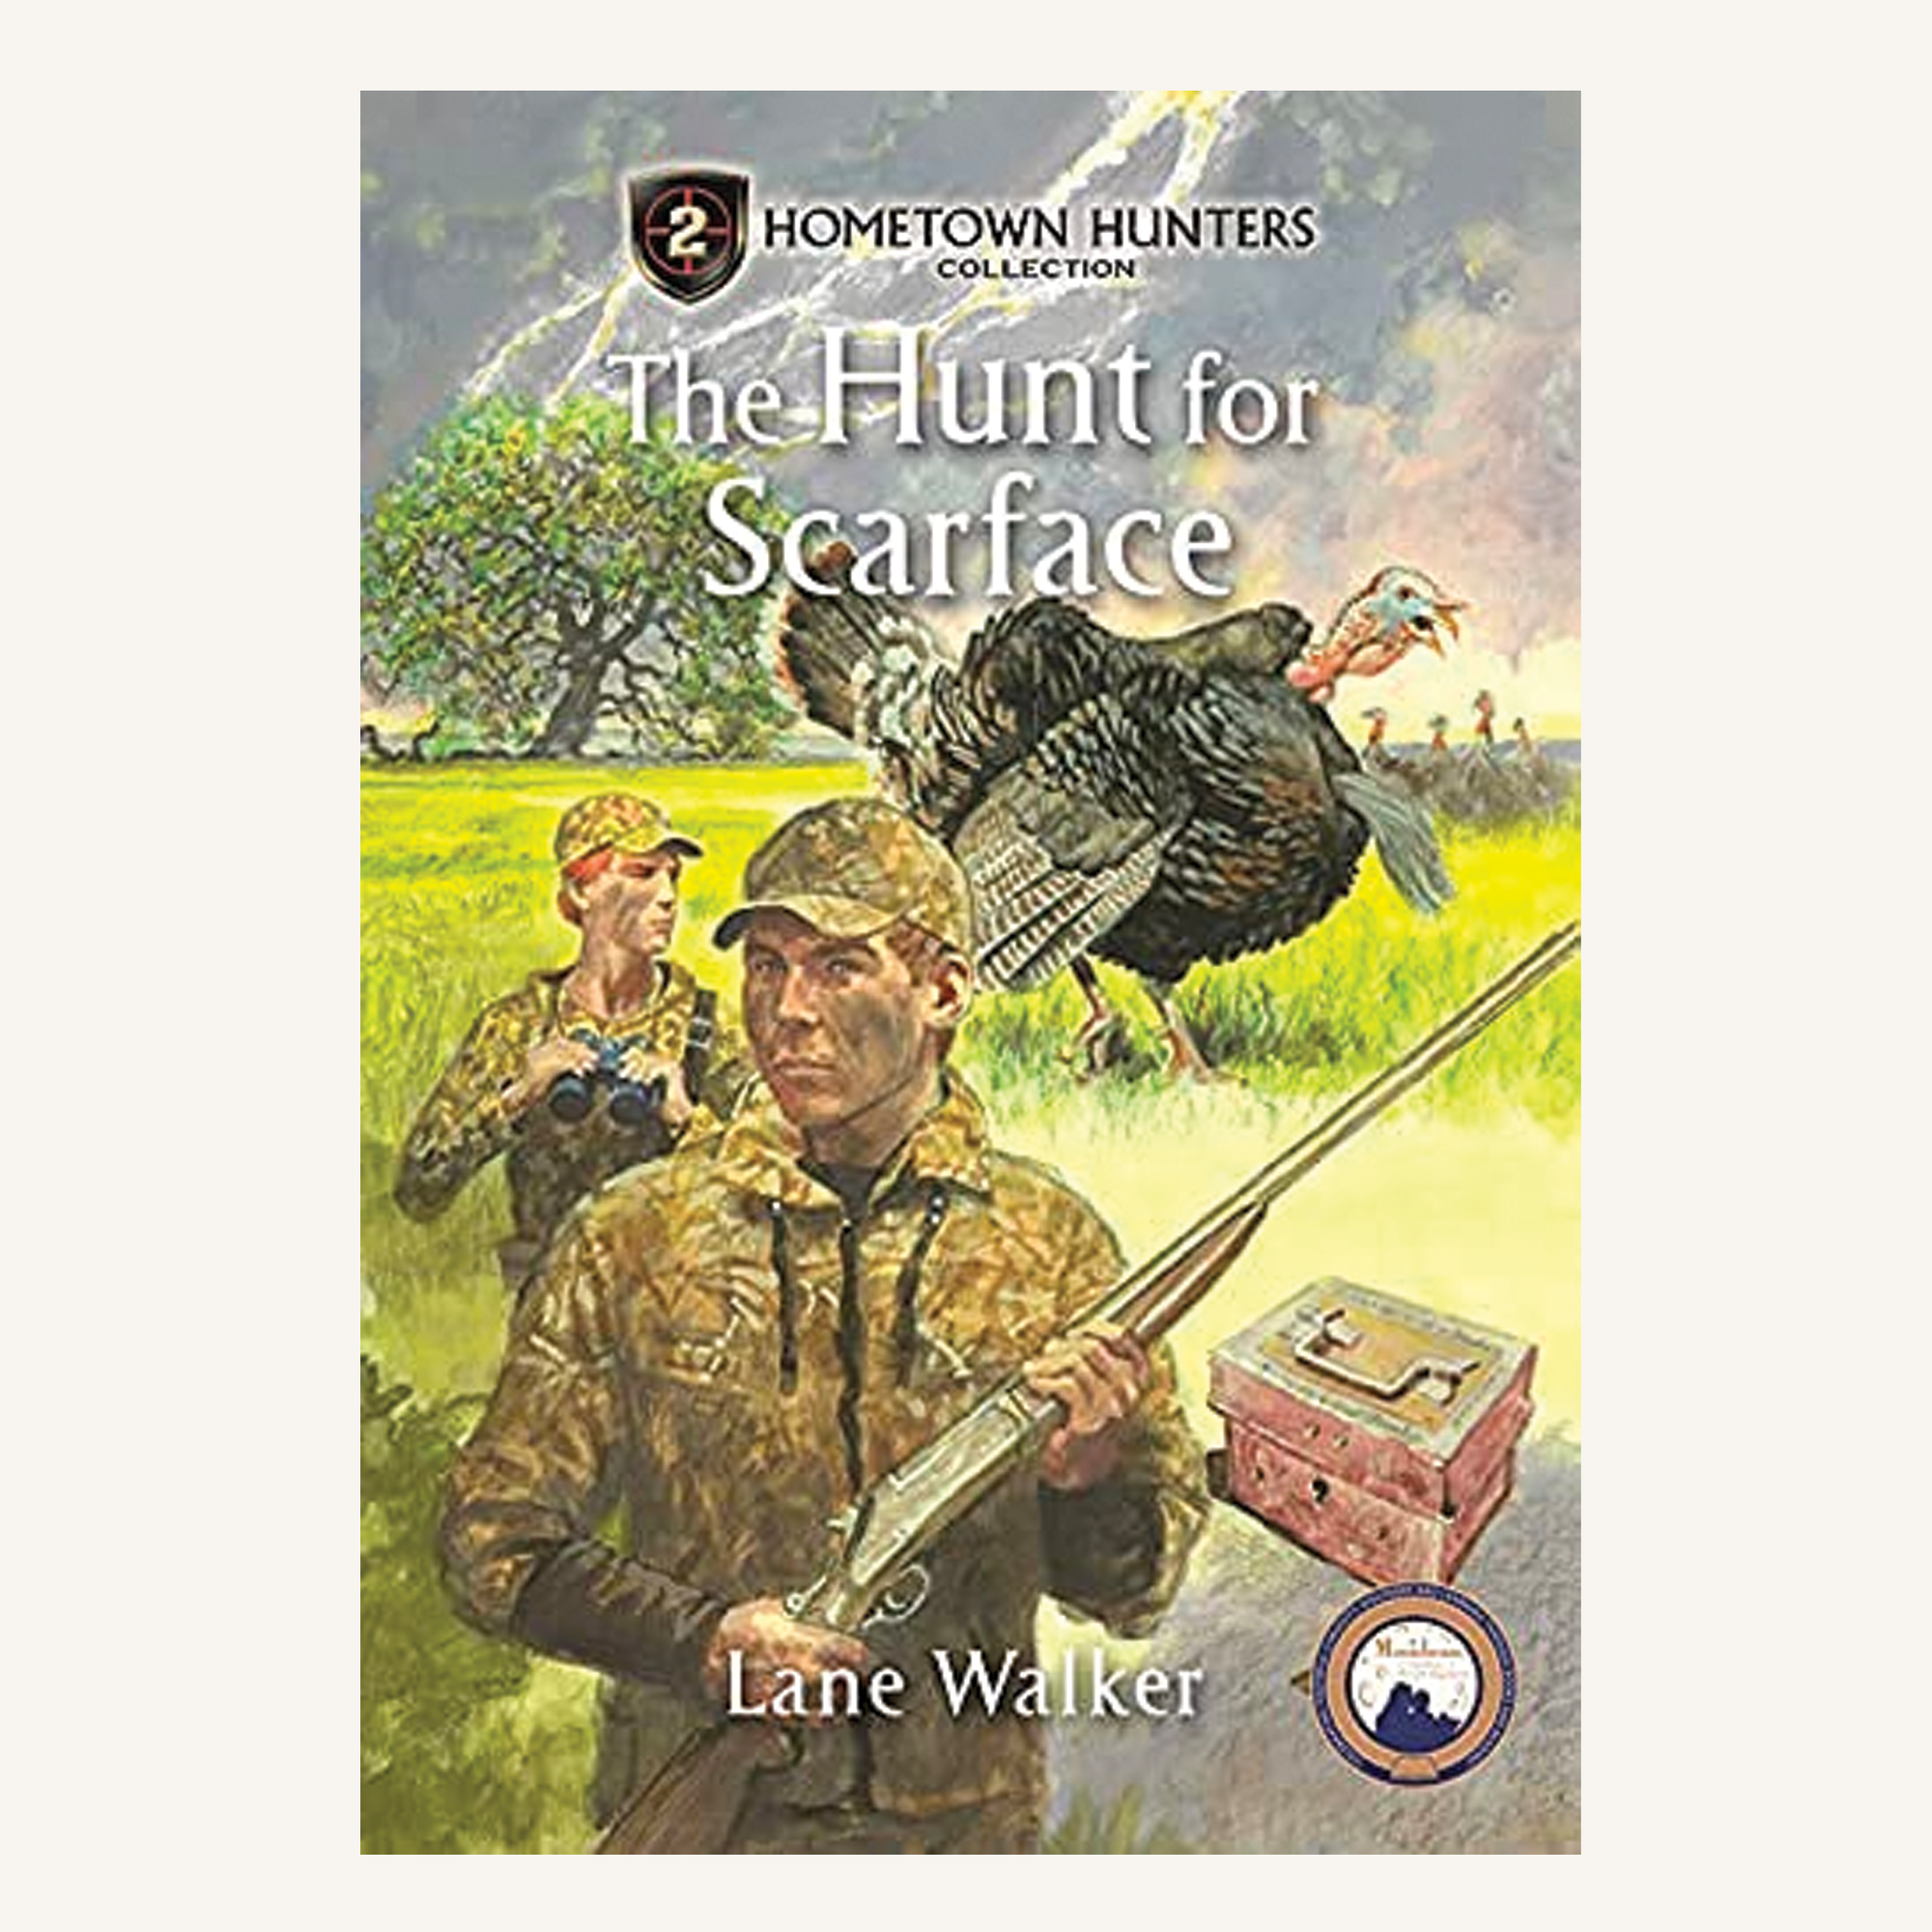 The Hunt for Scarface (Hometown Hunters Collection Book 2)